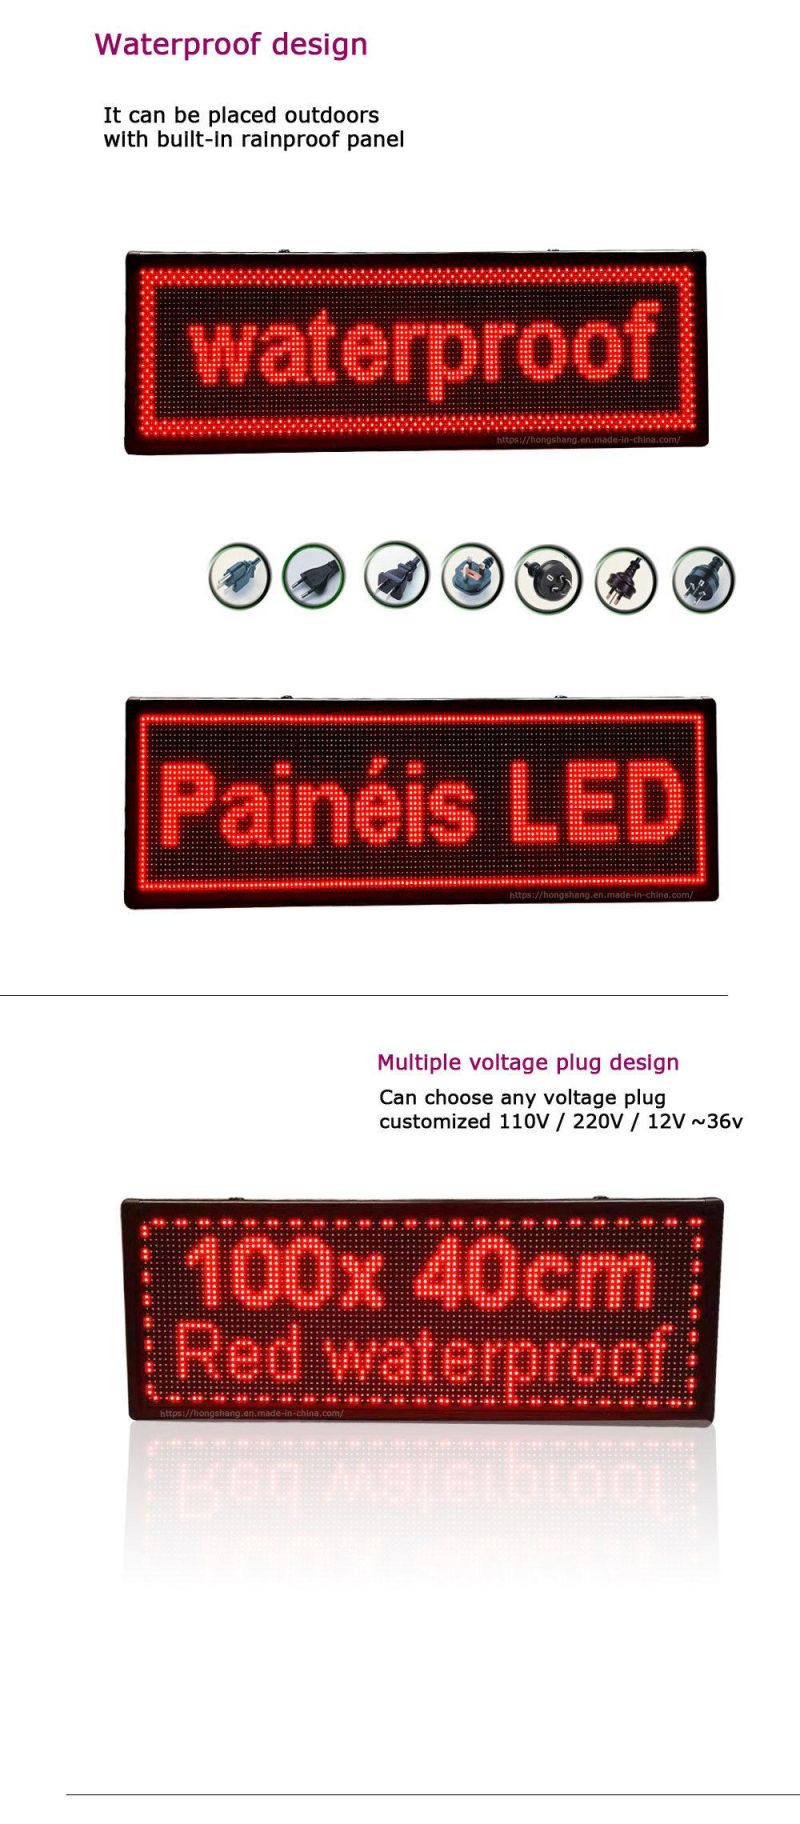 P10 Red Color Outdoor Waterproof Advertising Text Board LED Screens